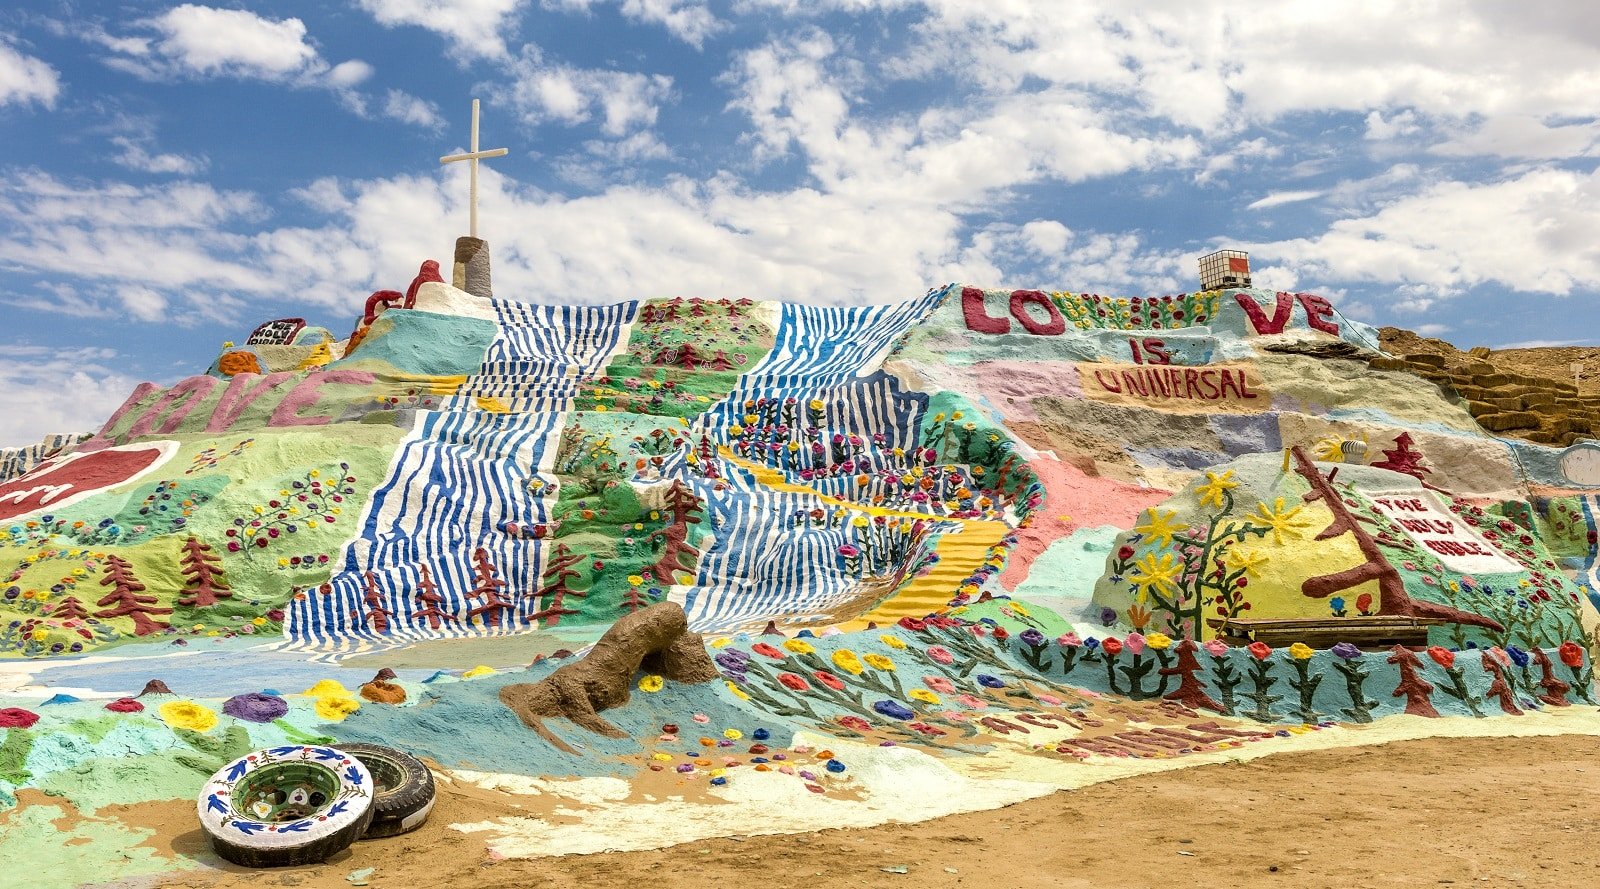 <p><span>Salvation Mountain, near Niland, California, is a vibrant pilgrimage to one man’s devotion and artistic vision. Leonard Knight created this folk art monument covered in colorful biblical and inspirational messages. Made from adobe, straw, and thousands of gallons of lead-free paint, it uniquely expresses faith and creativity.</span></p> <p><span>With its bright colors and simple yet powerful messages, the mountain offers a visually stunning and thought-provoking experience. It’s a must-visit for art enthusiasts and those seeking a place of peace and positivity.</span></p> <p><b>Insider’s Tip: </b><span>Bring plenty of water and sunscreen, as the area can get very hot.</span></p> <p><b>When To Travel: </b><span>Visit in the cooler months from November to March.</span></p> <p><b>How To Get There: </b><span>It’s located in the lower desert of Southern California in Imperial County and accessible via Beal Road.</span></p>